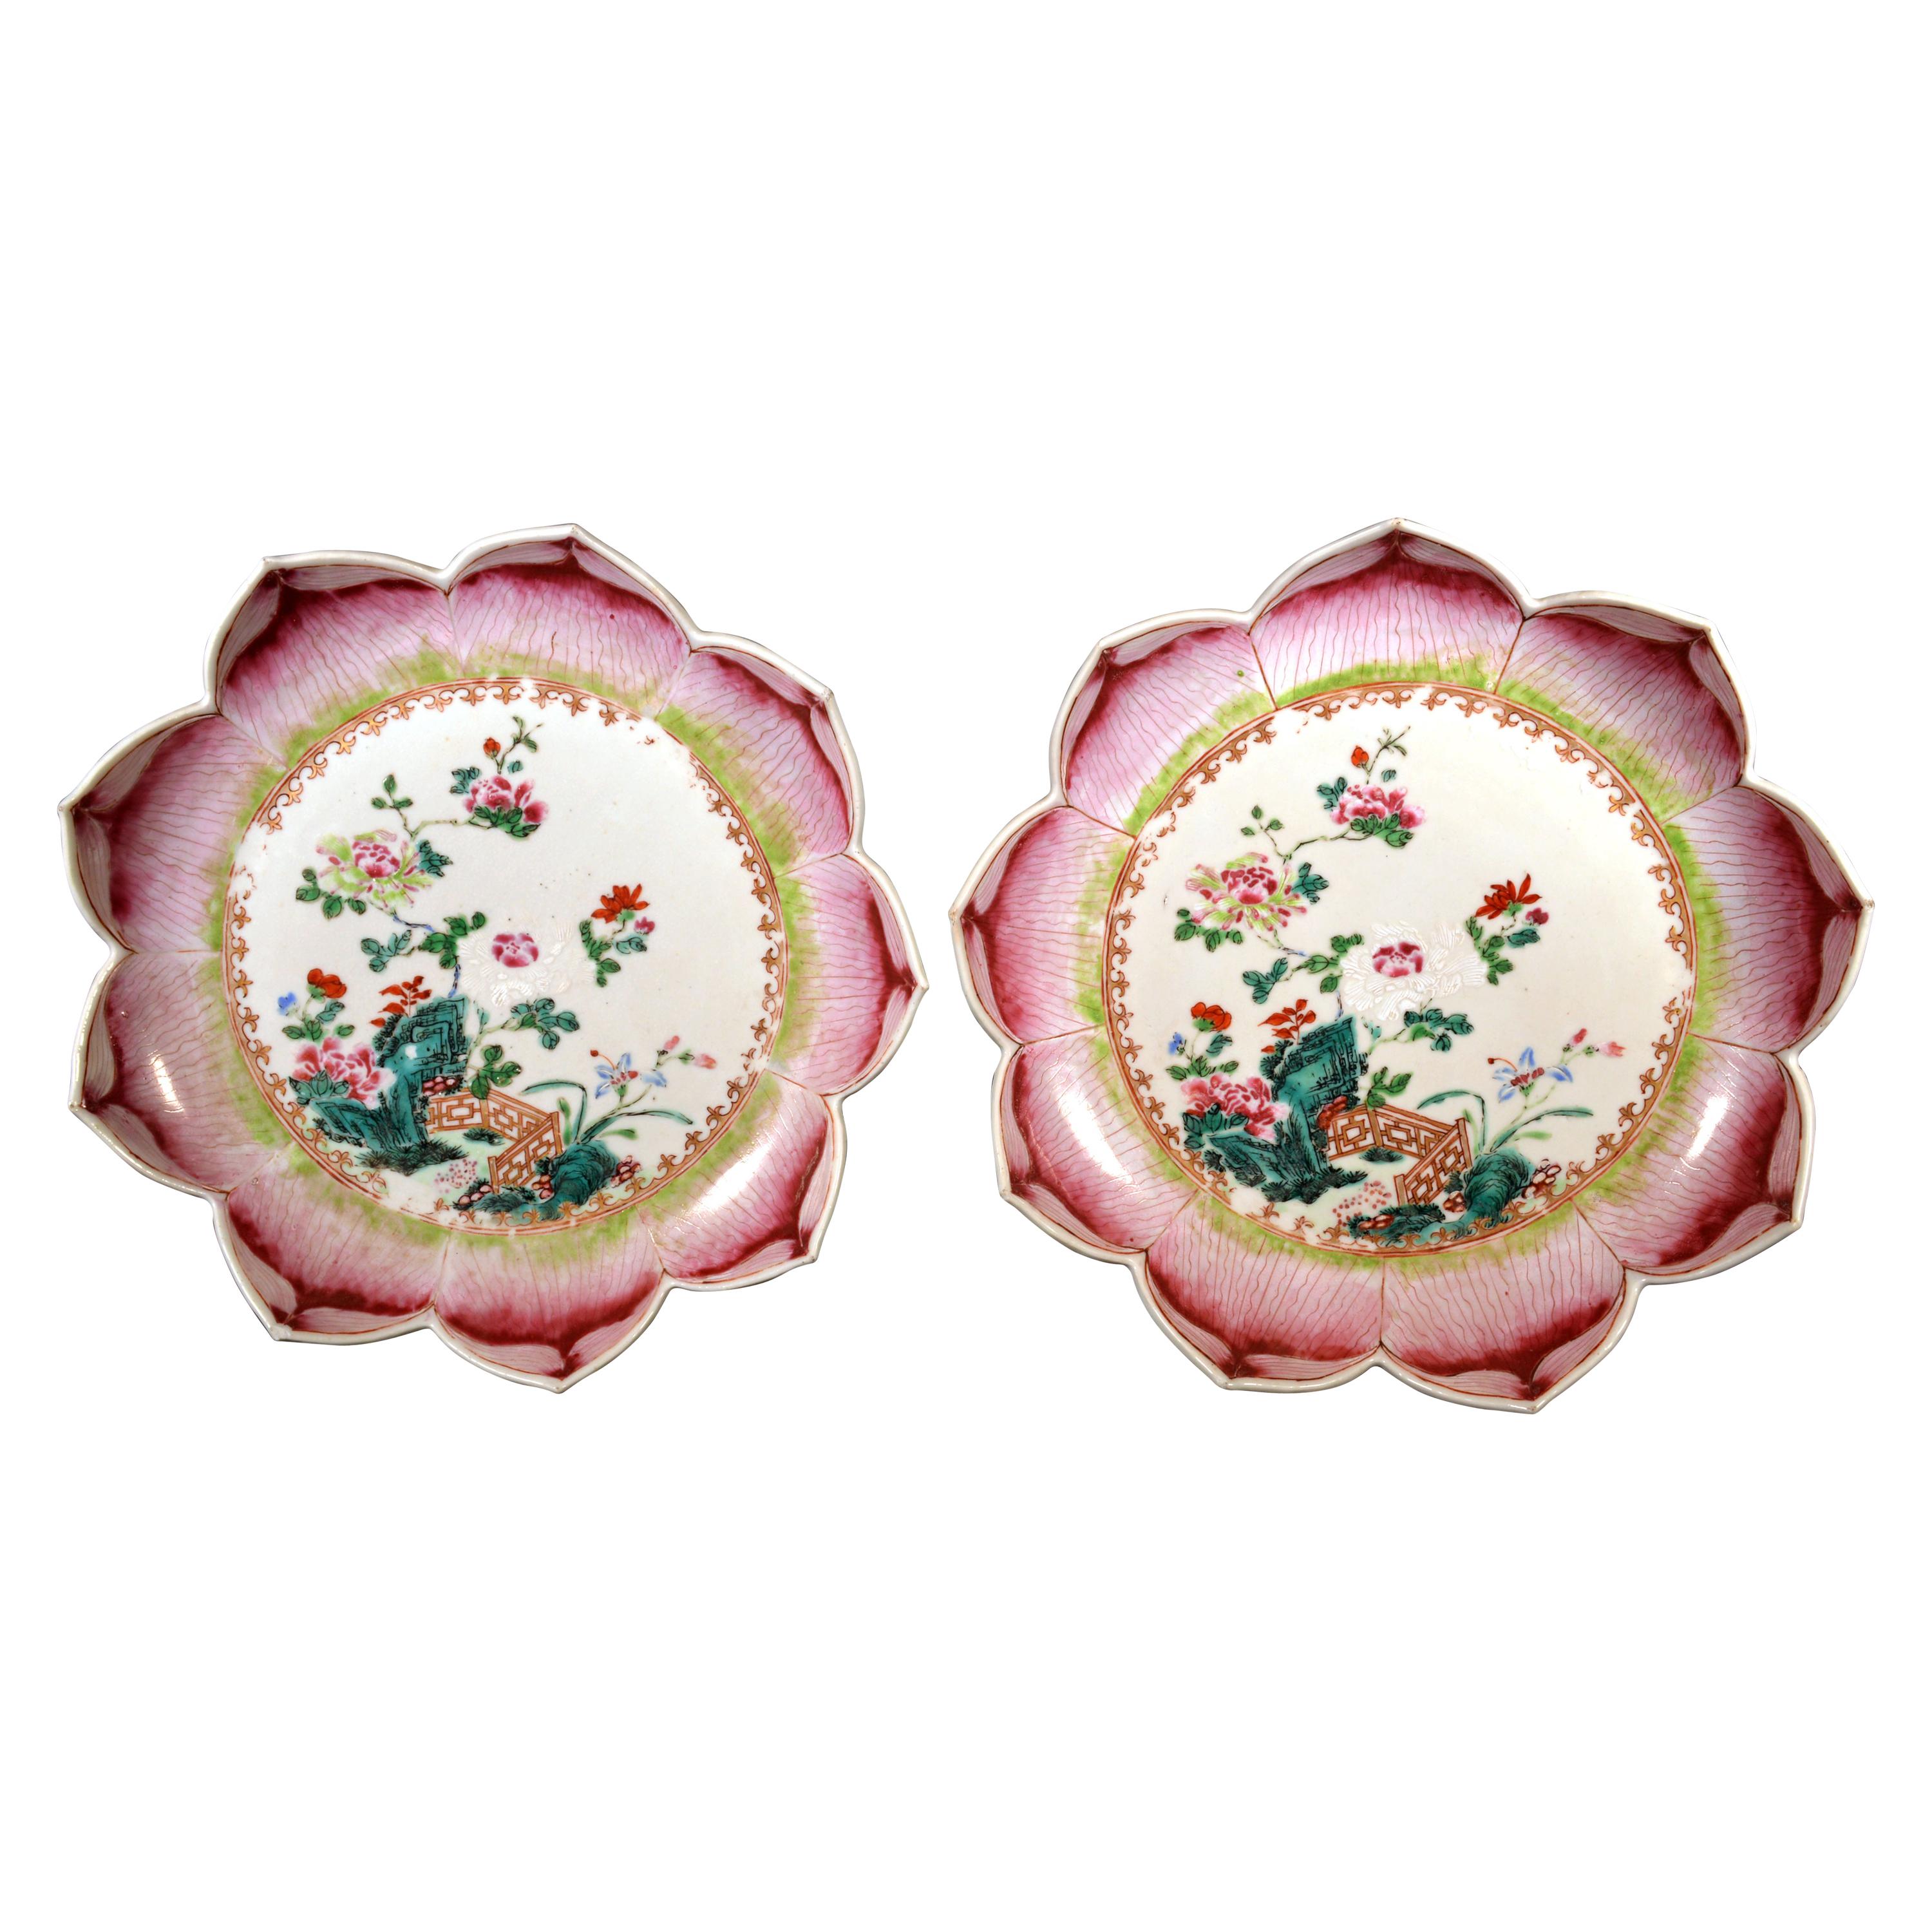 Chinese Export Porcelain Lotus Leaf Shaped Pair of Dishes, circa 1765